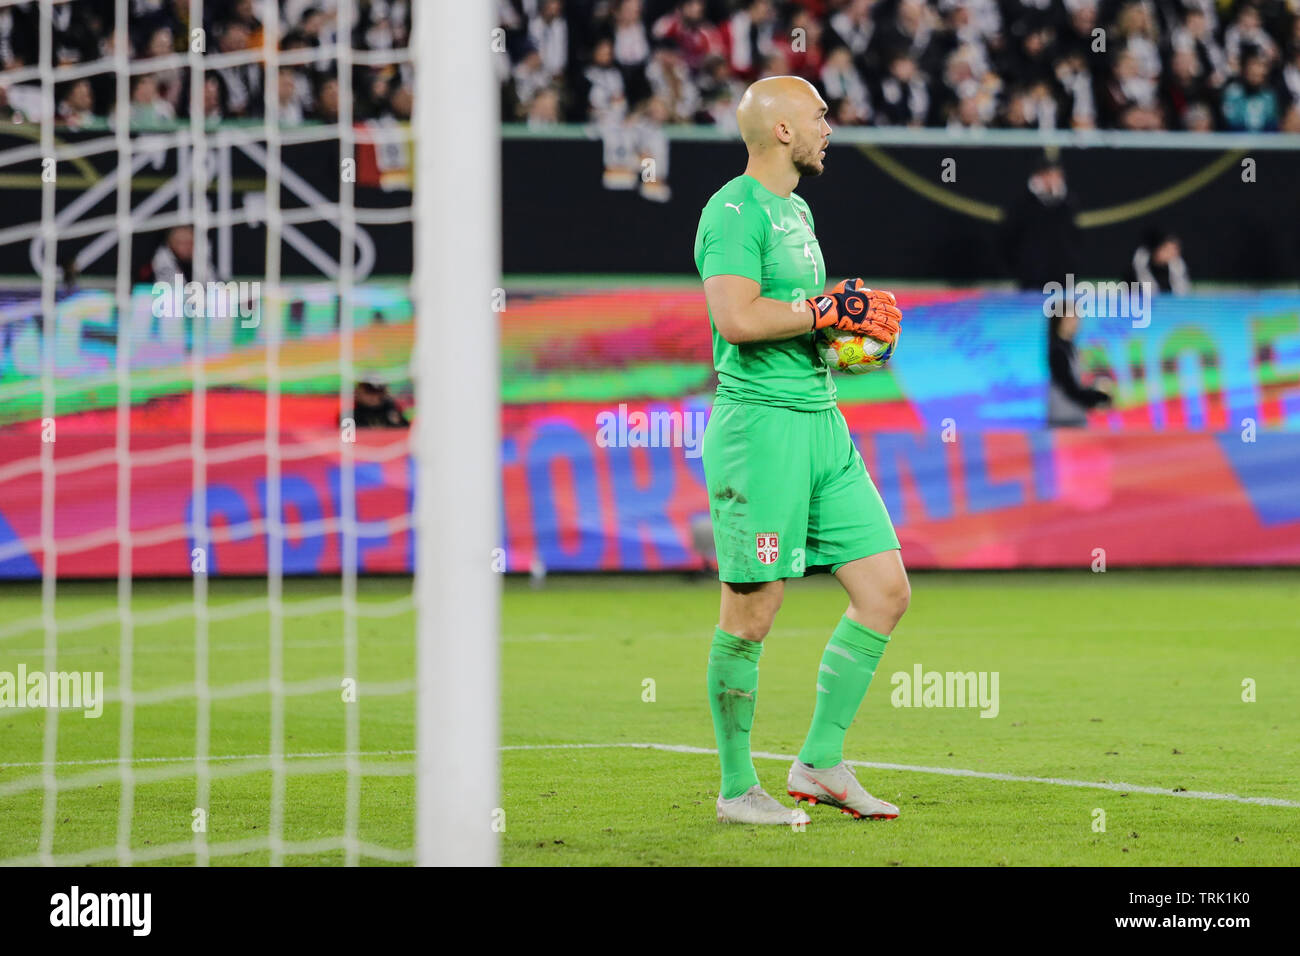 Wolfsburg, Germany, March 20, 2019: Serbia national team goalkeeper, Marko Dmitrovic, in action during the soccer game between Germany and Serbia Stock Photo